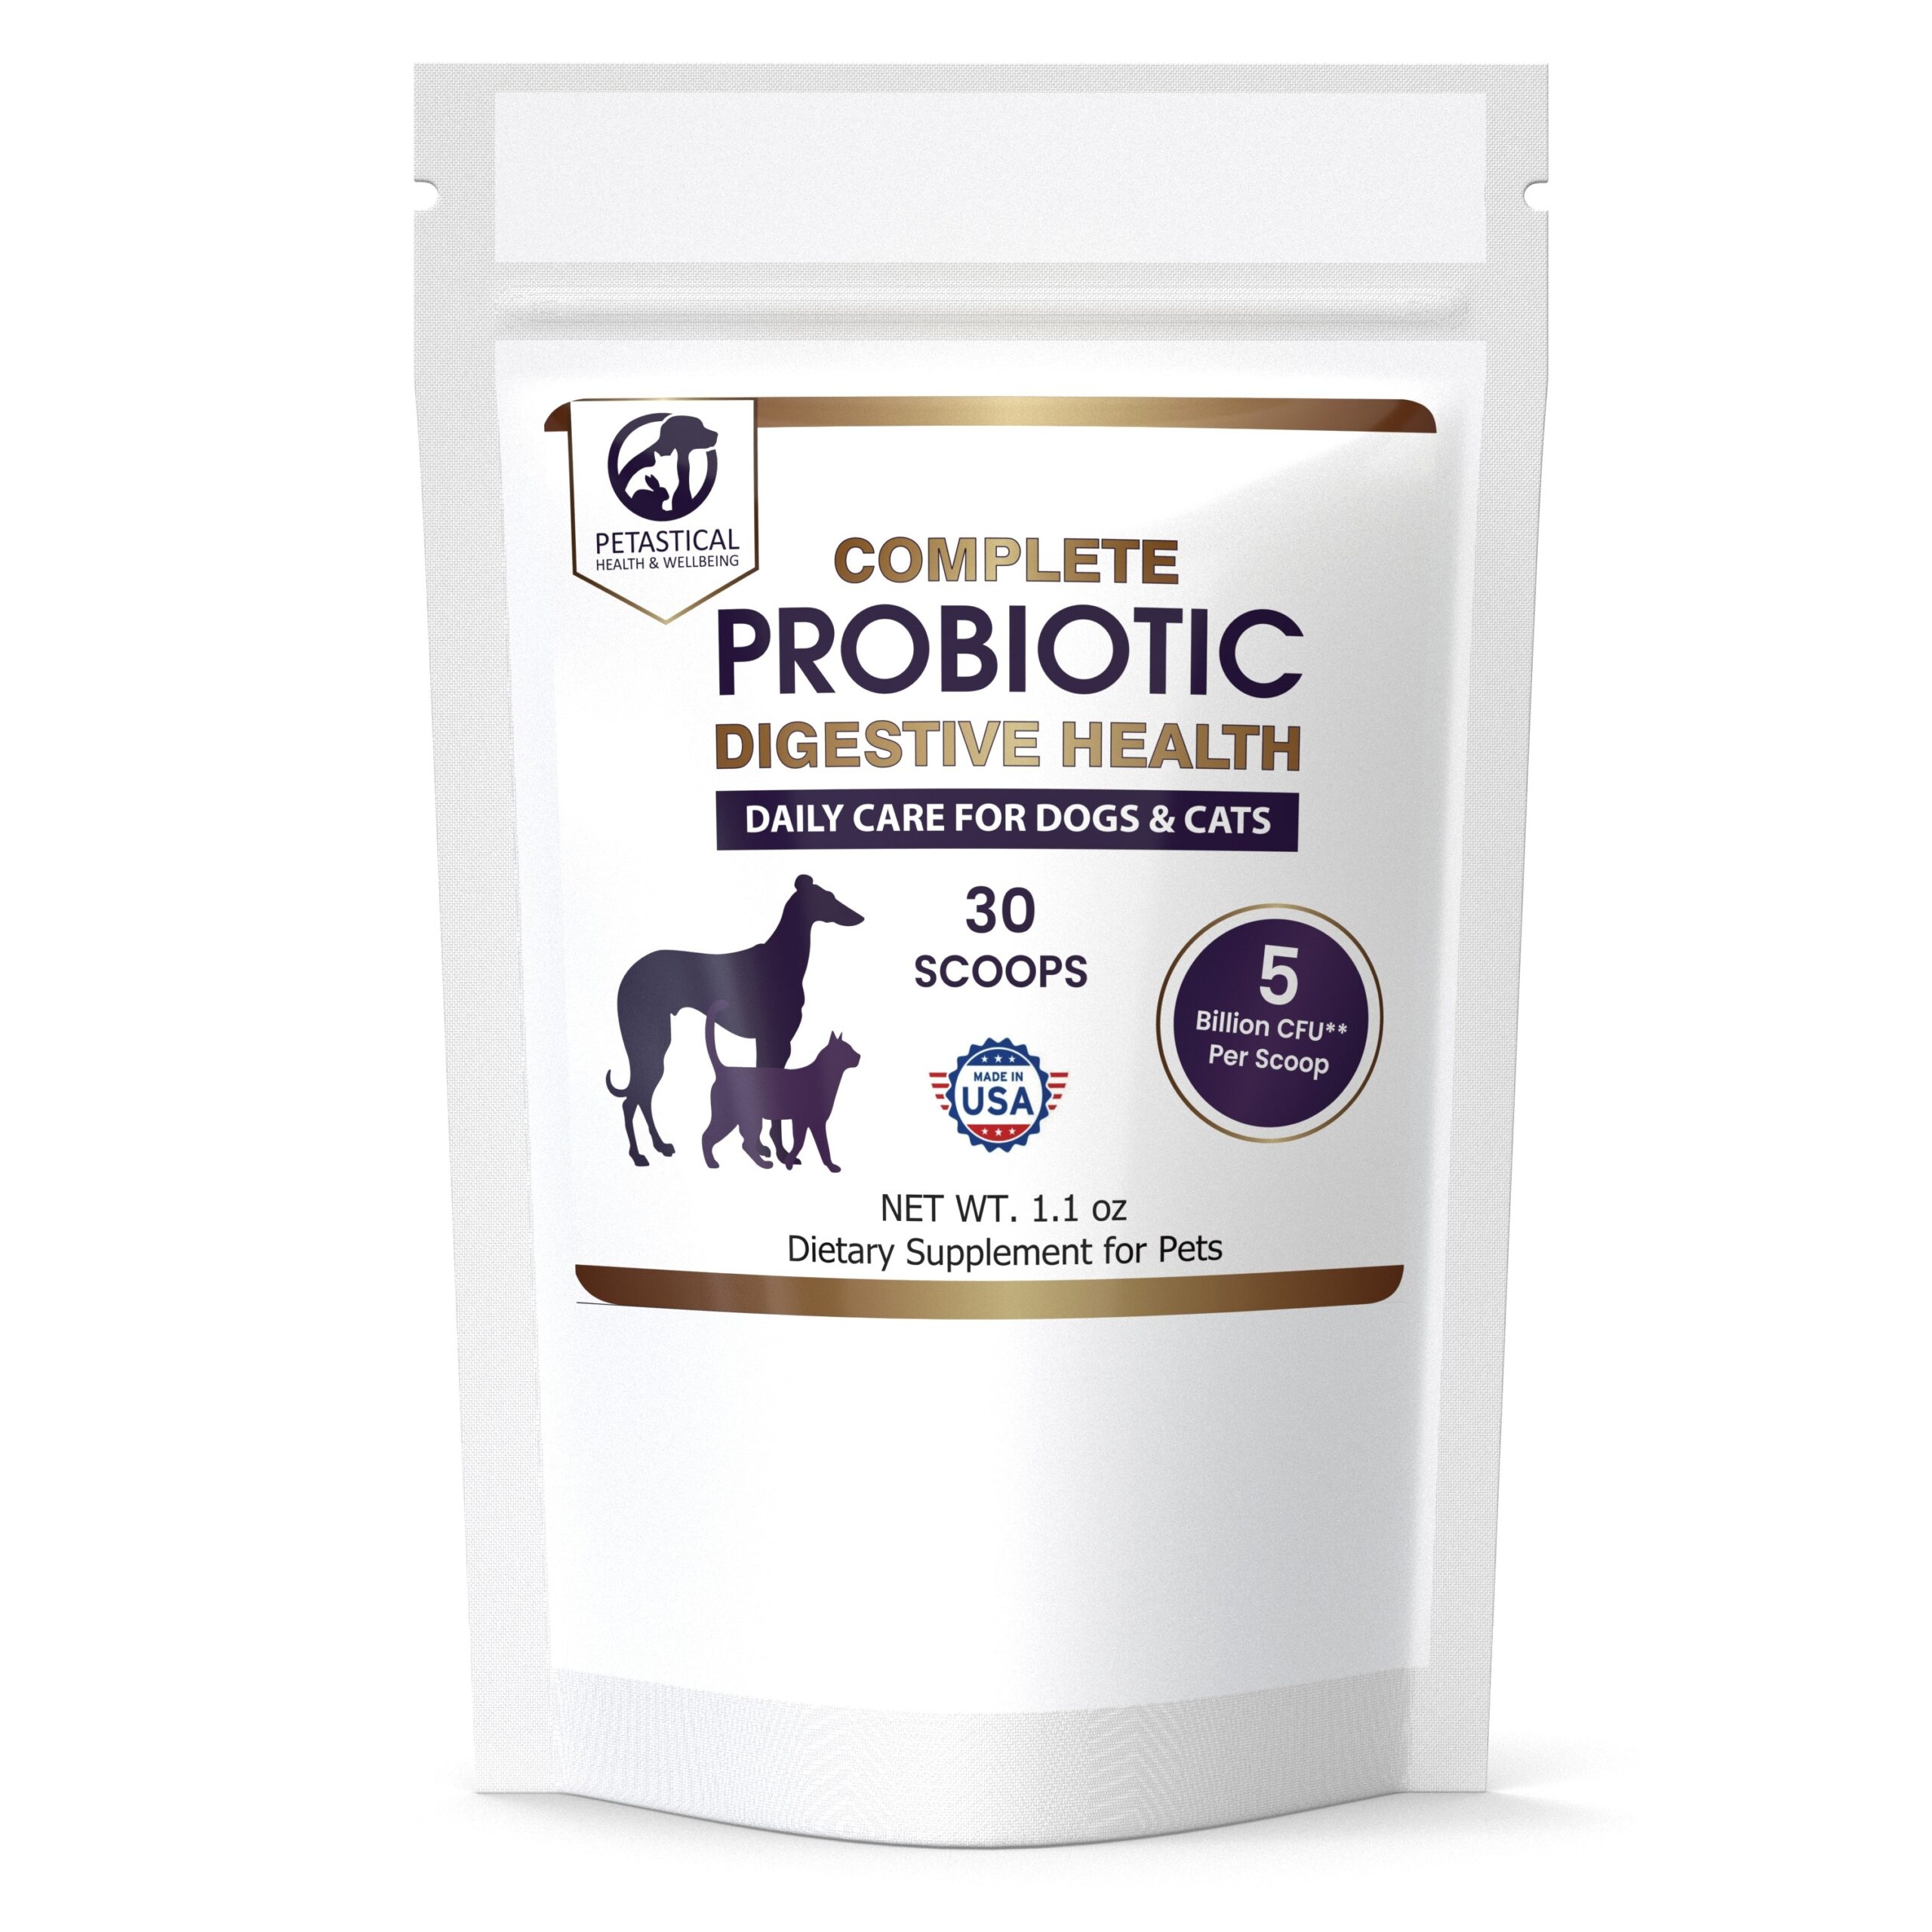 Petastical Probiotic Powder for Dogs and Cats (30 Scoop)